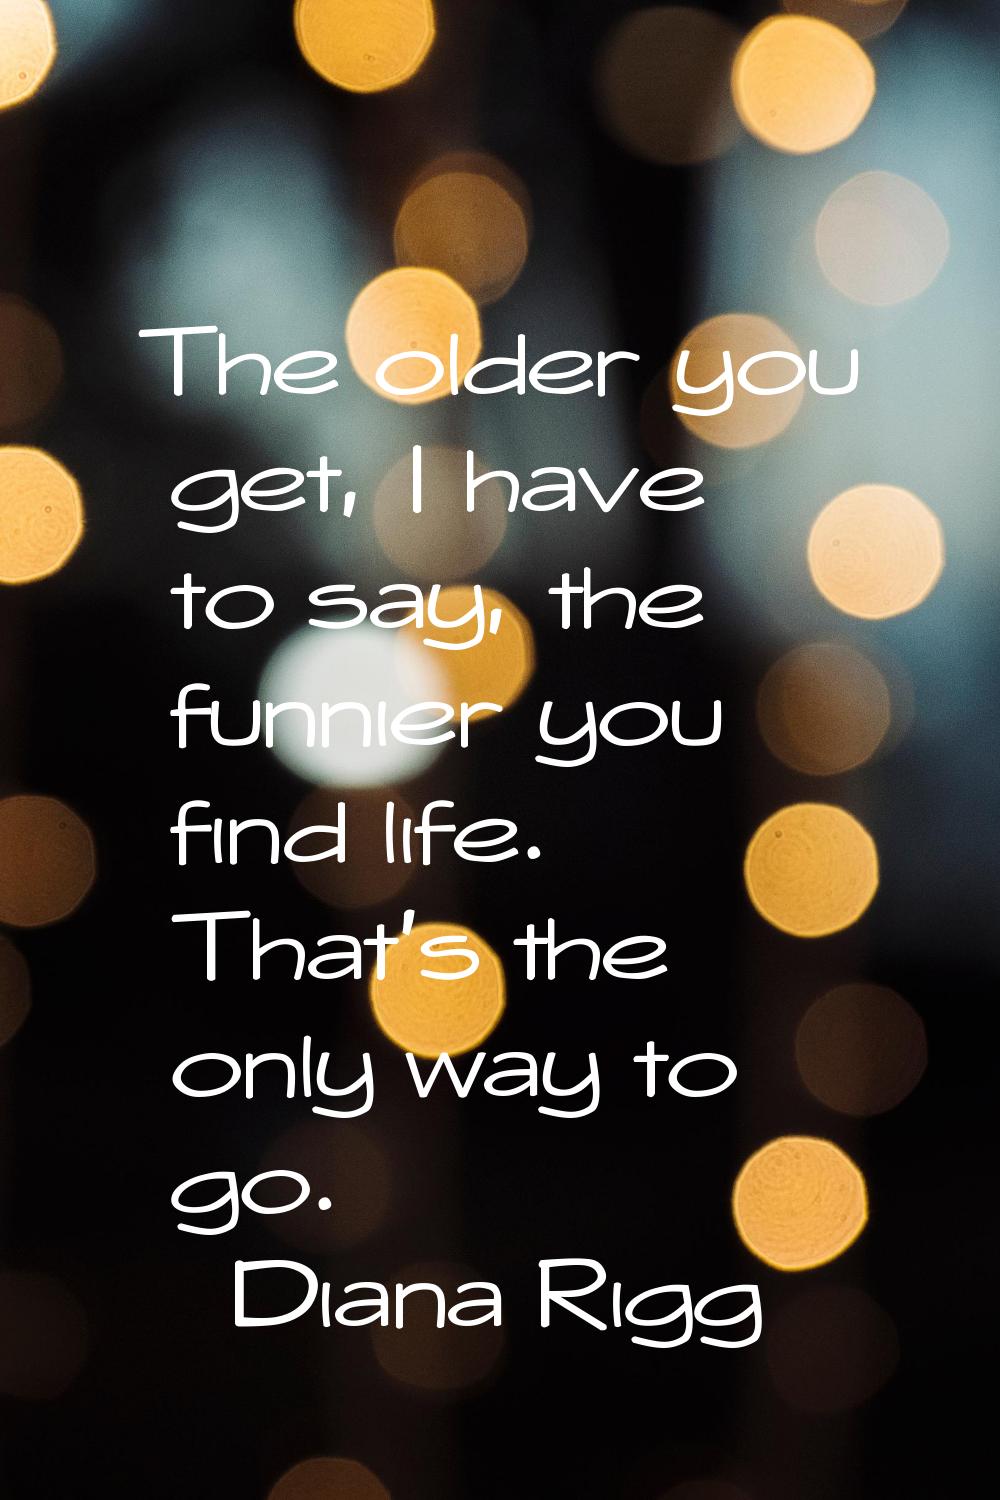 The older you get, I have to say, the funnier you find life. That's the only way to go.